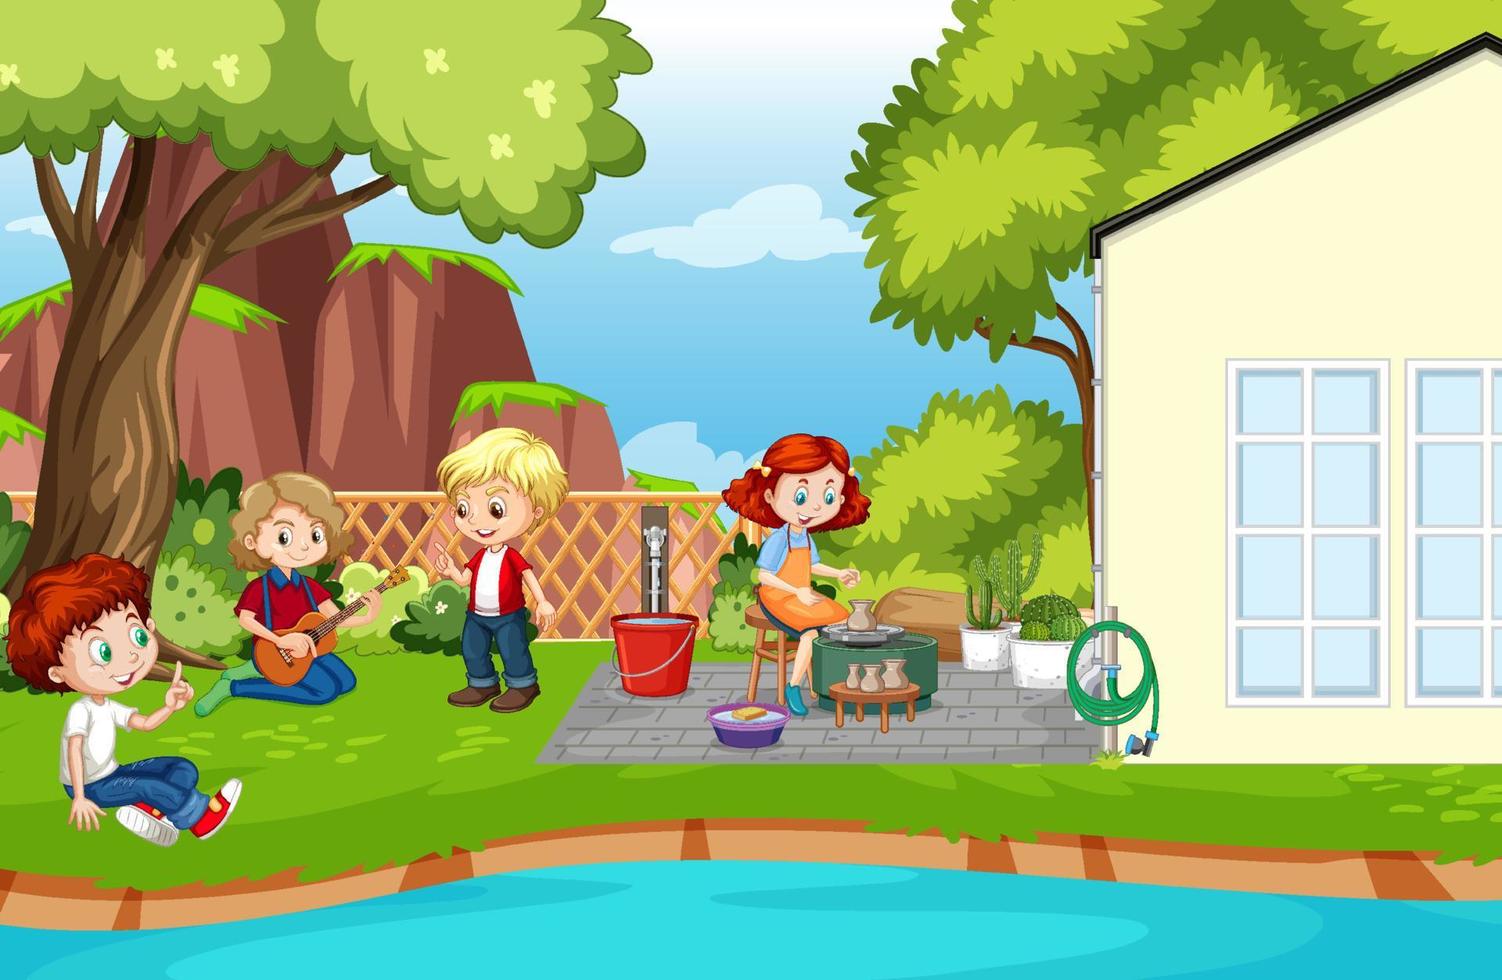 Scene of backyard with kids and fence vector